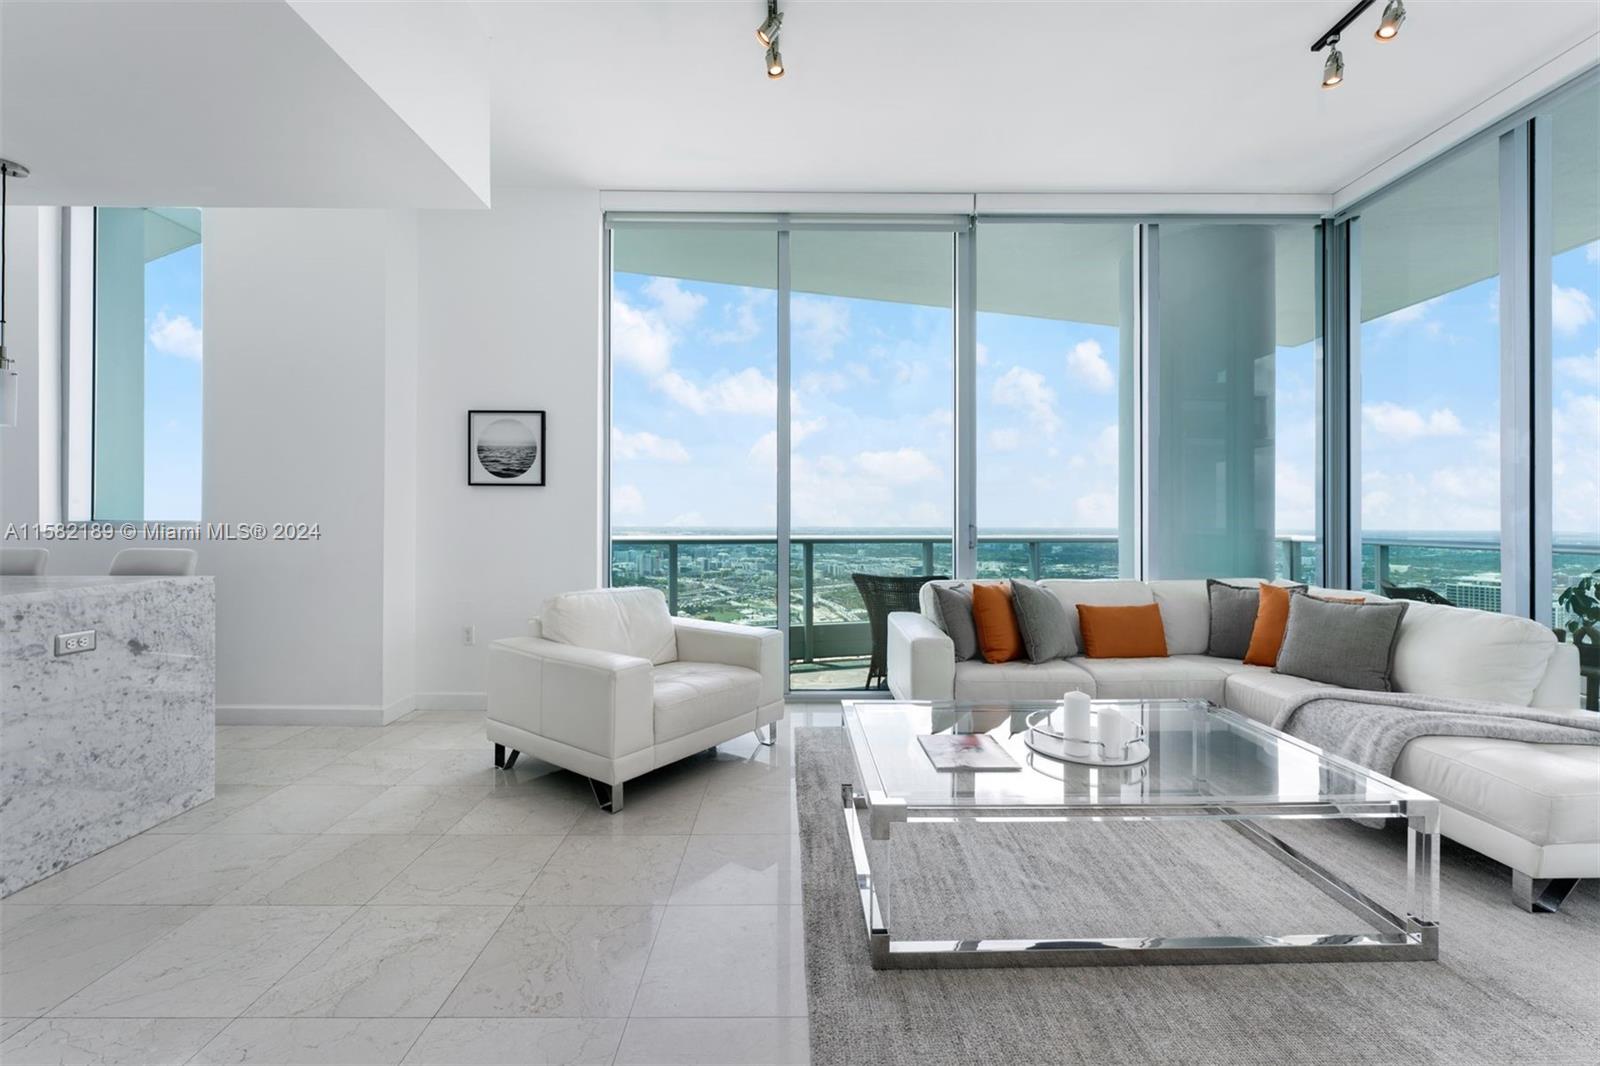 Furnished 2/2.5 corner unit available for rent at 900 Biscayne Bay in Downtown, Miami. Come live in the center of it all, next to the Perez Art Museum, Frost Science Museum, Miami Heat Arena, Adrienne Arsht Center, the Downtown WorldCenter featuring restaurants such as Serafina and Maple & Ash. Smart Home unit features electric remote controlled shades throughout with blackouts in bedrooms, Lutron lighting system, Ecobee thermostat and electronic door locks. Sub-Zero and Miele appliances, wrap around balcony and floor to ceiling windows with water and city views. Minutes to the MIA Airport, Brickell, Wynwood and the Beach.